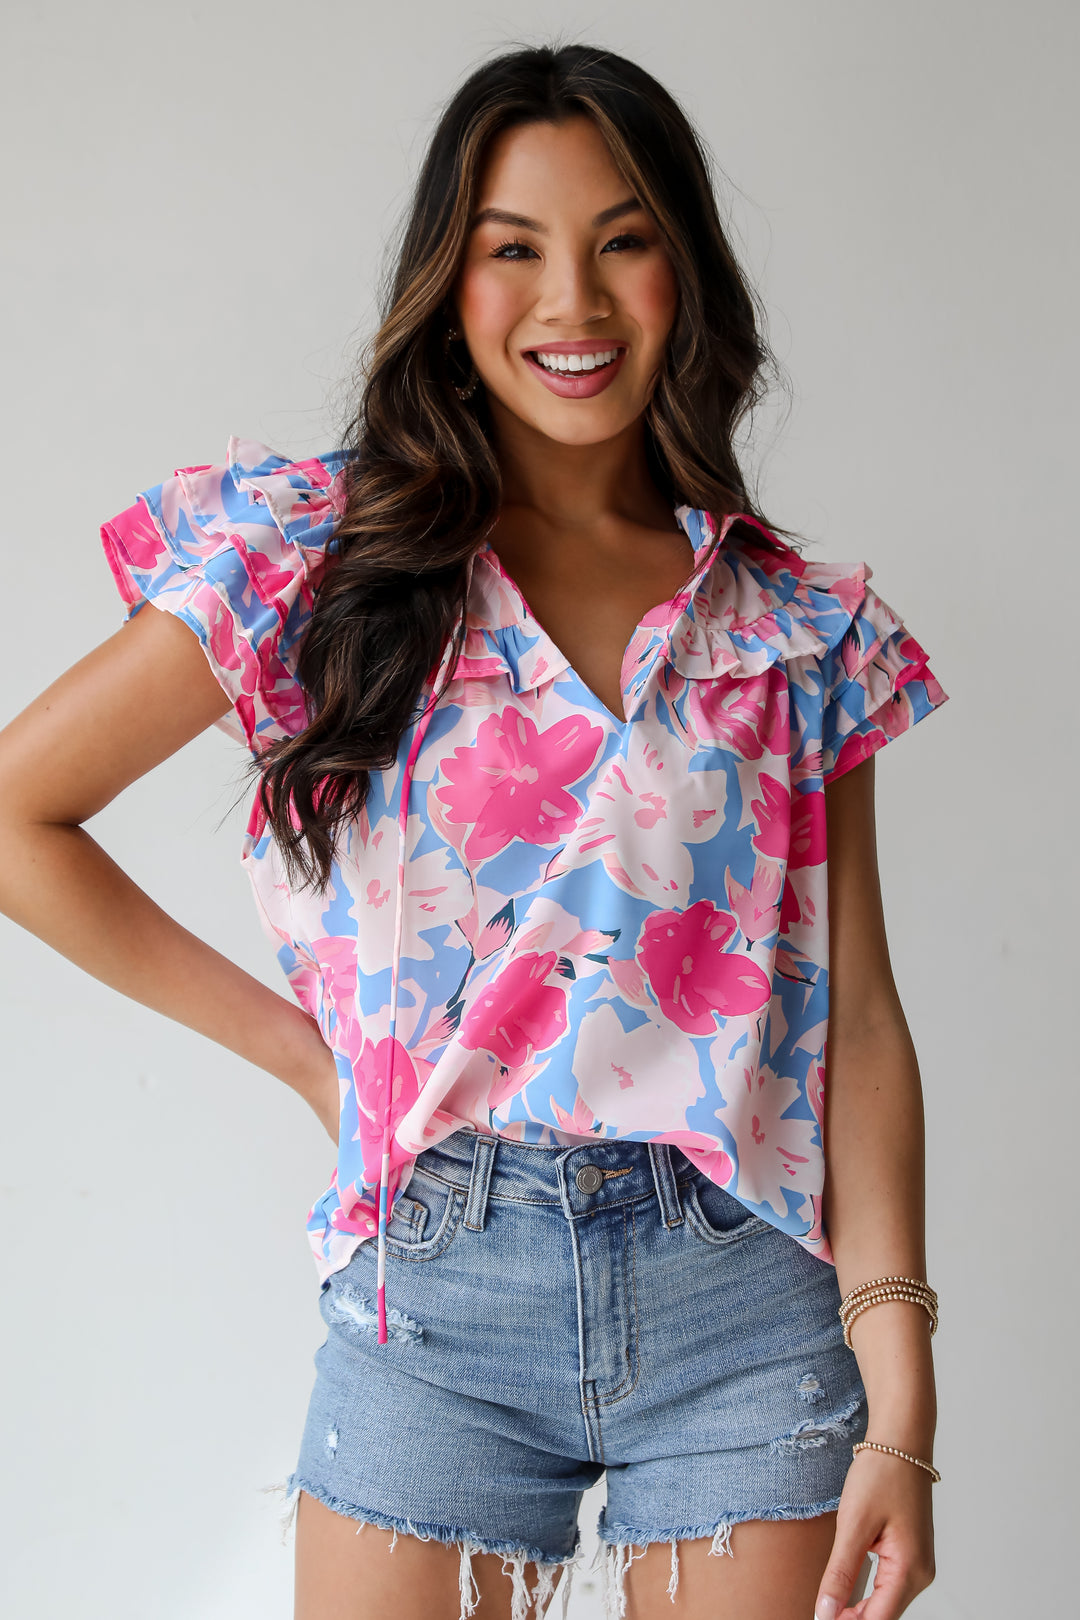 Exceedingly Adorable Pink Floral Blouse